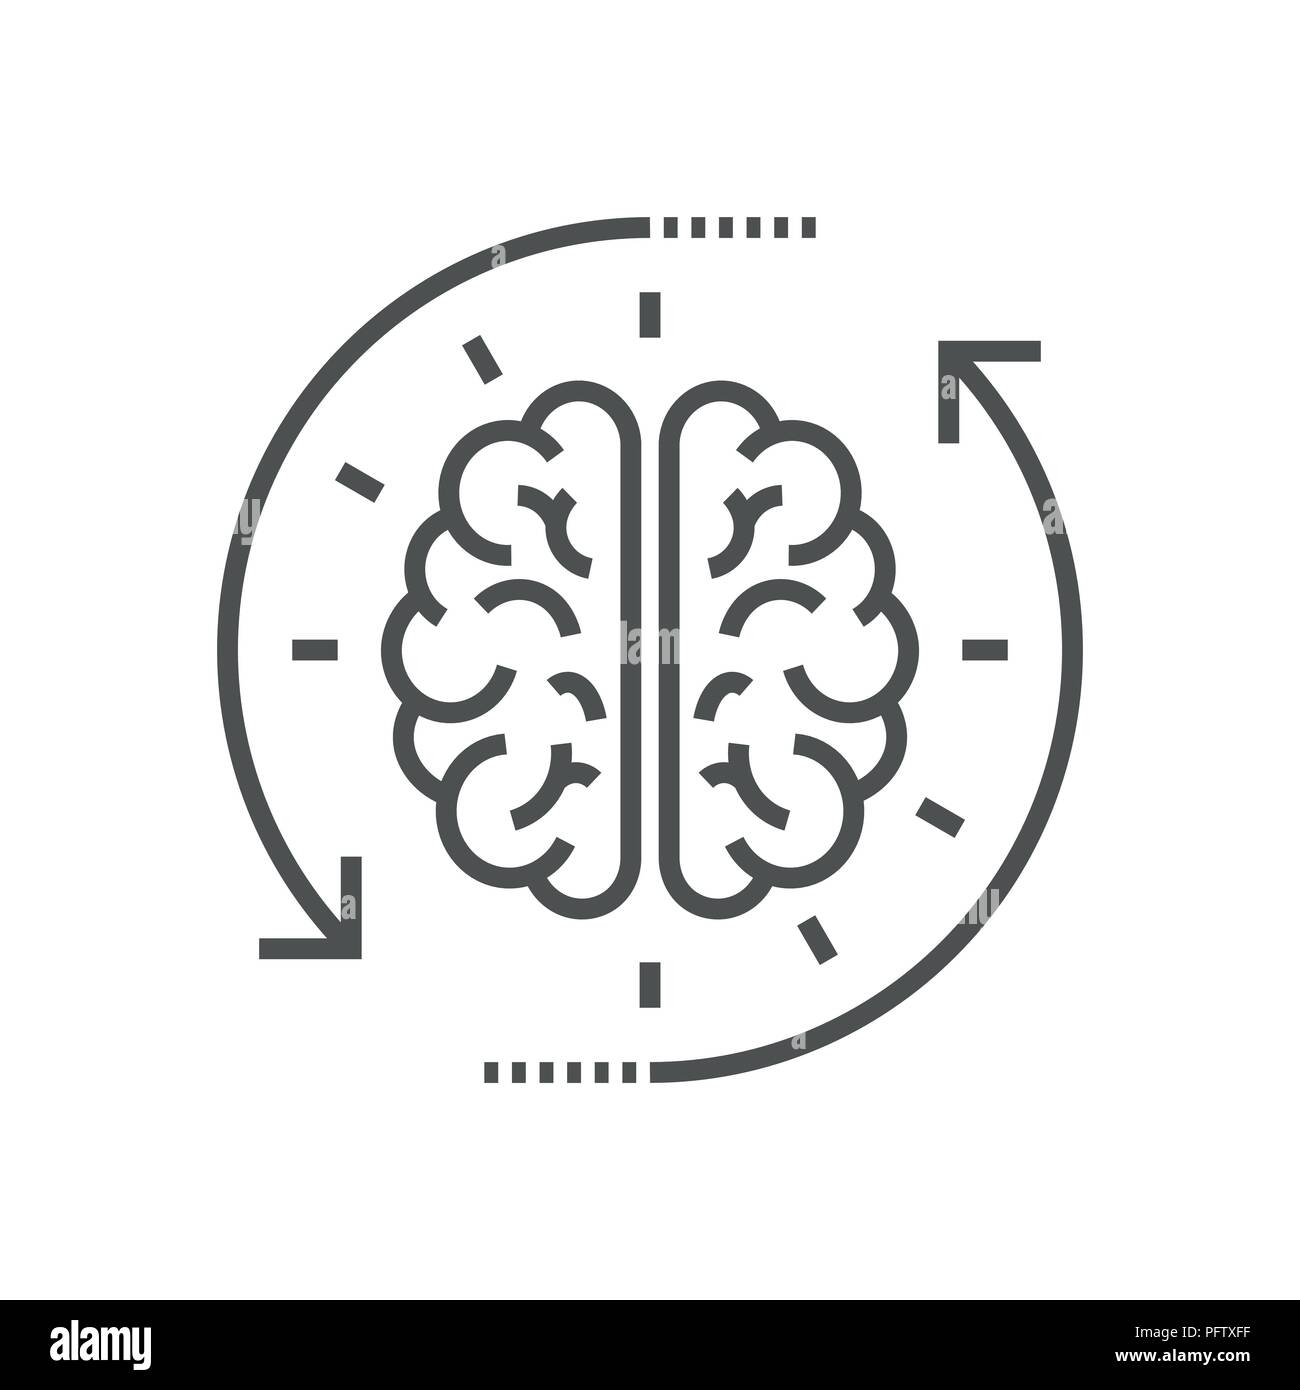 Concept of the thinking process, brainstorming, good idea, brain activity, insight. Flat line vector icon illustration design for your web design and print Stock Vector